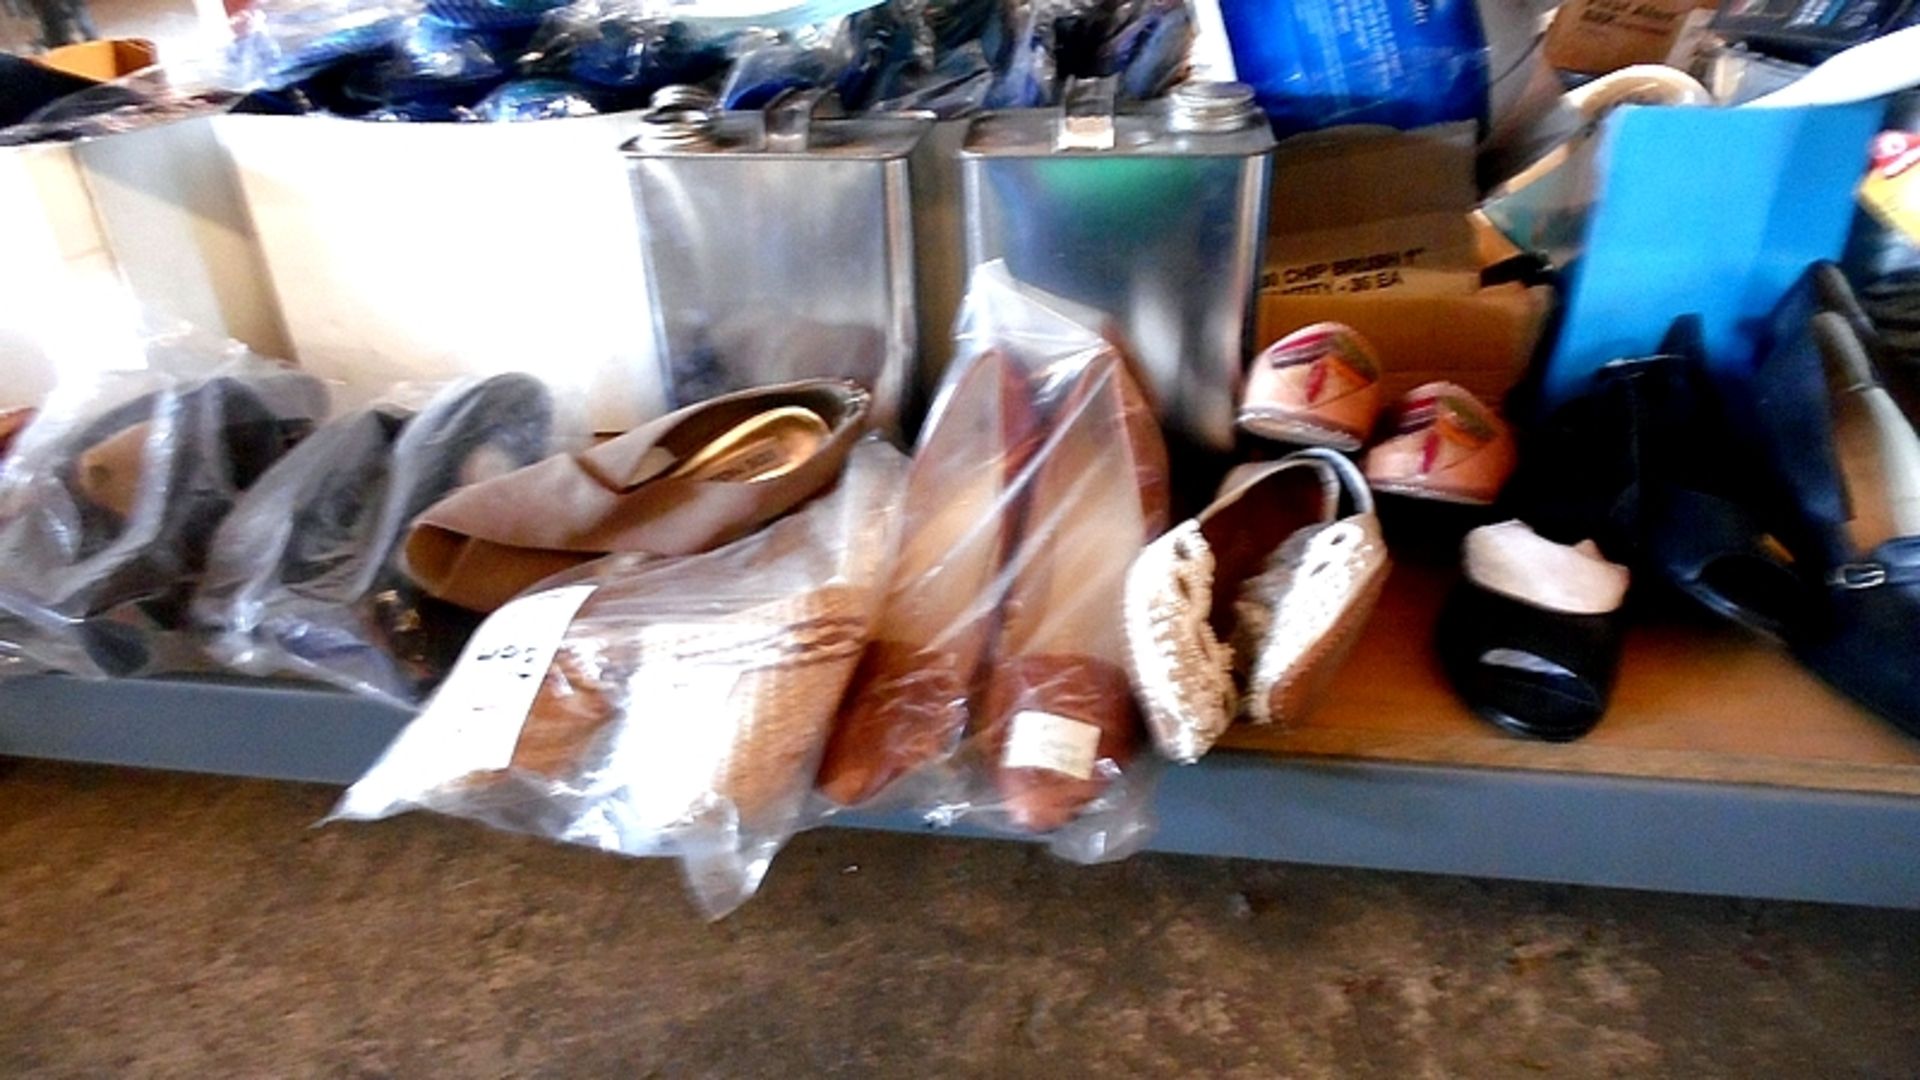 ASSORTED PAIR OF SHOES